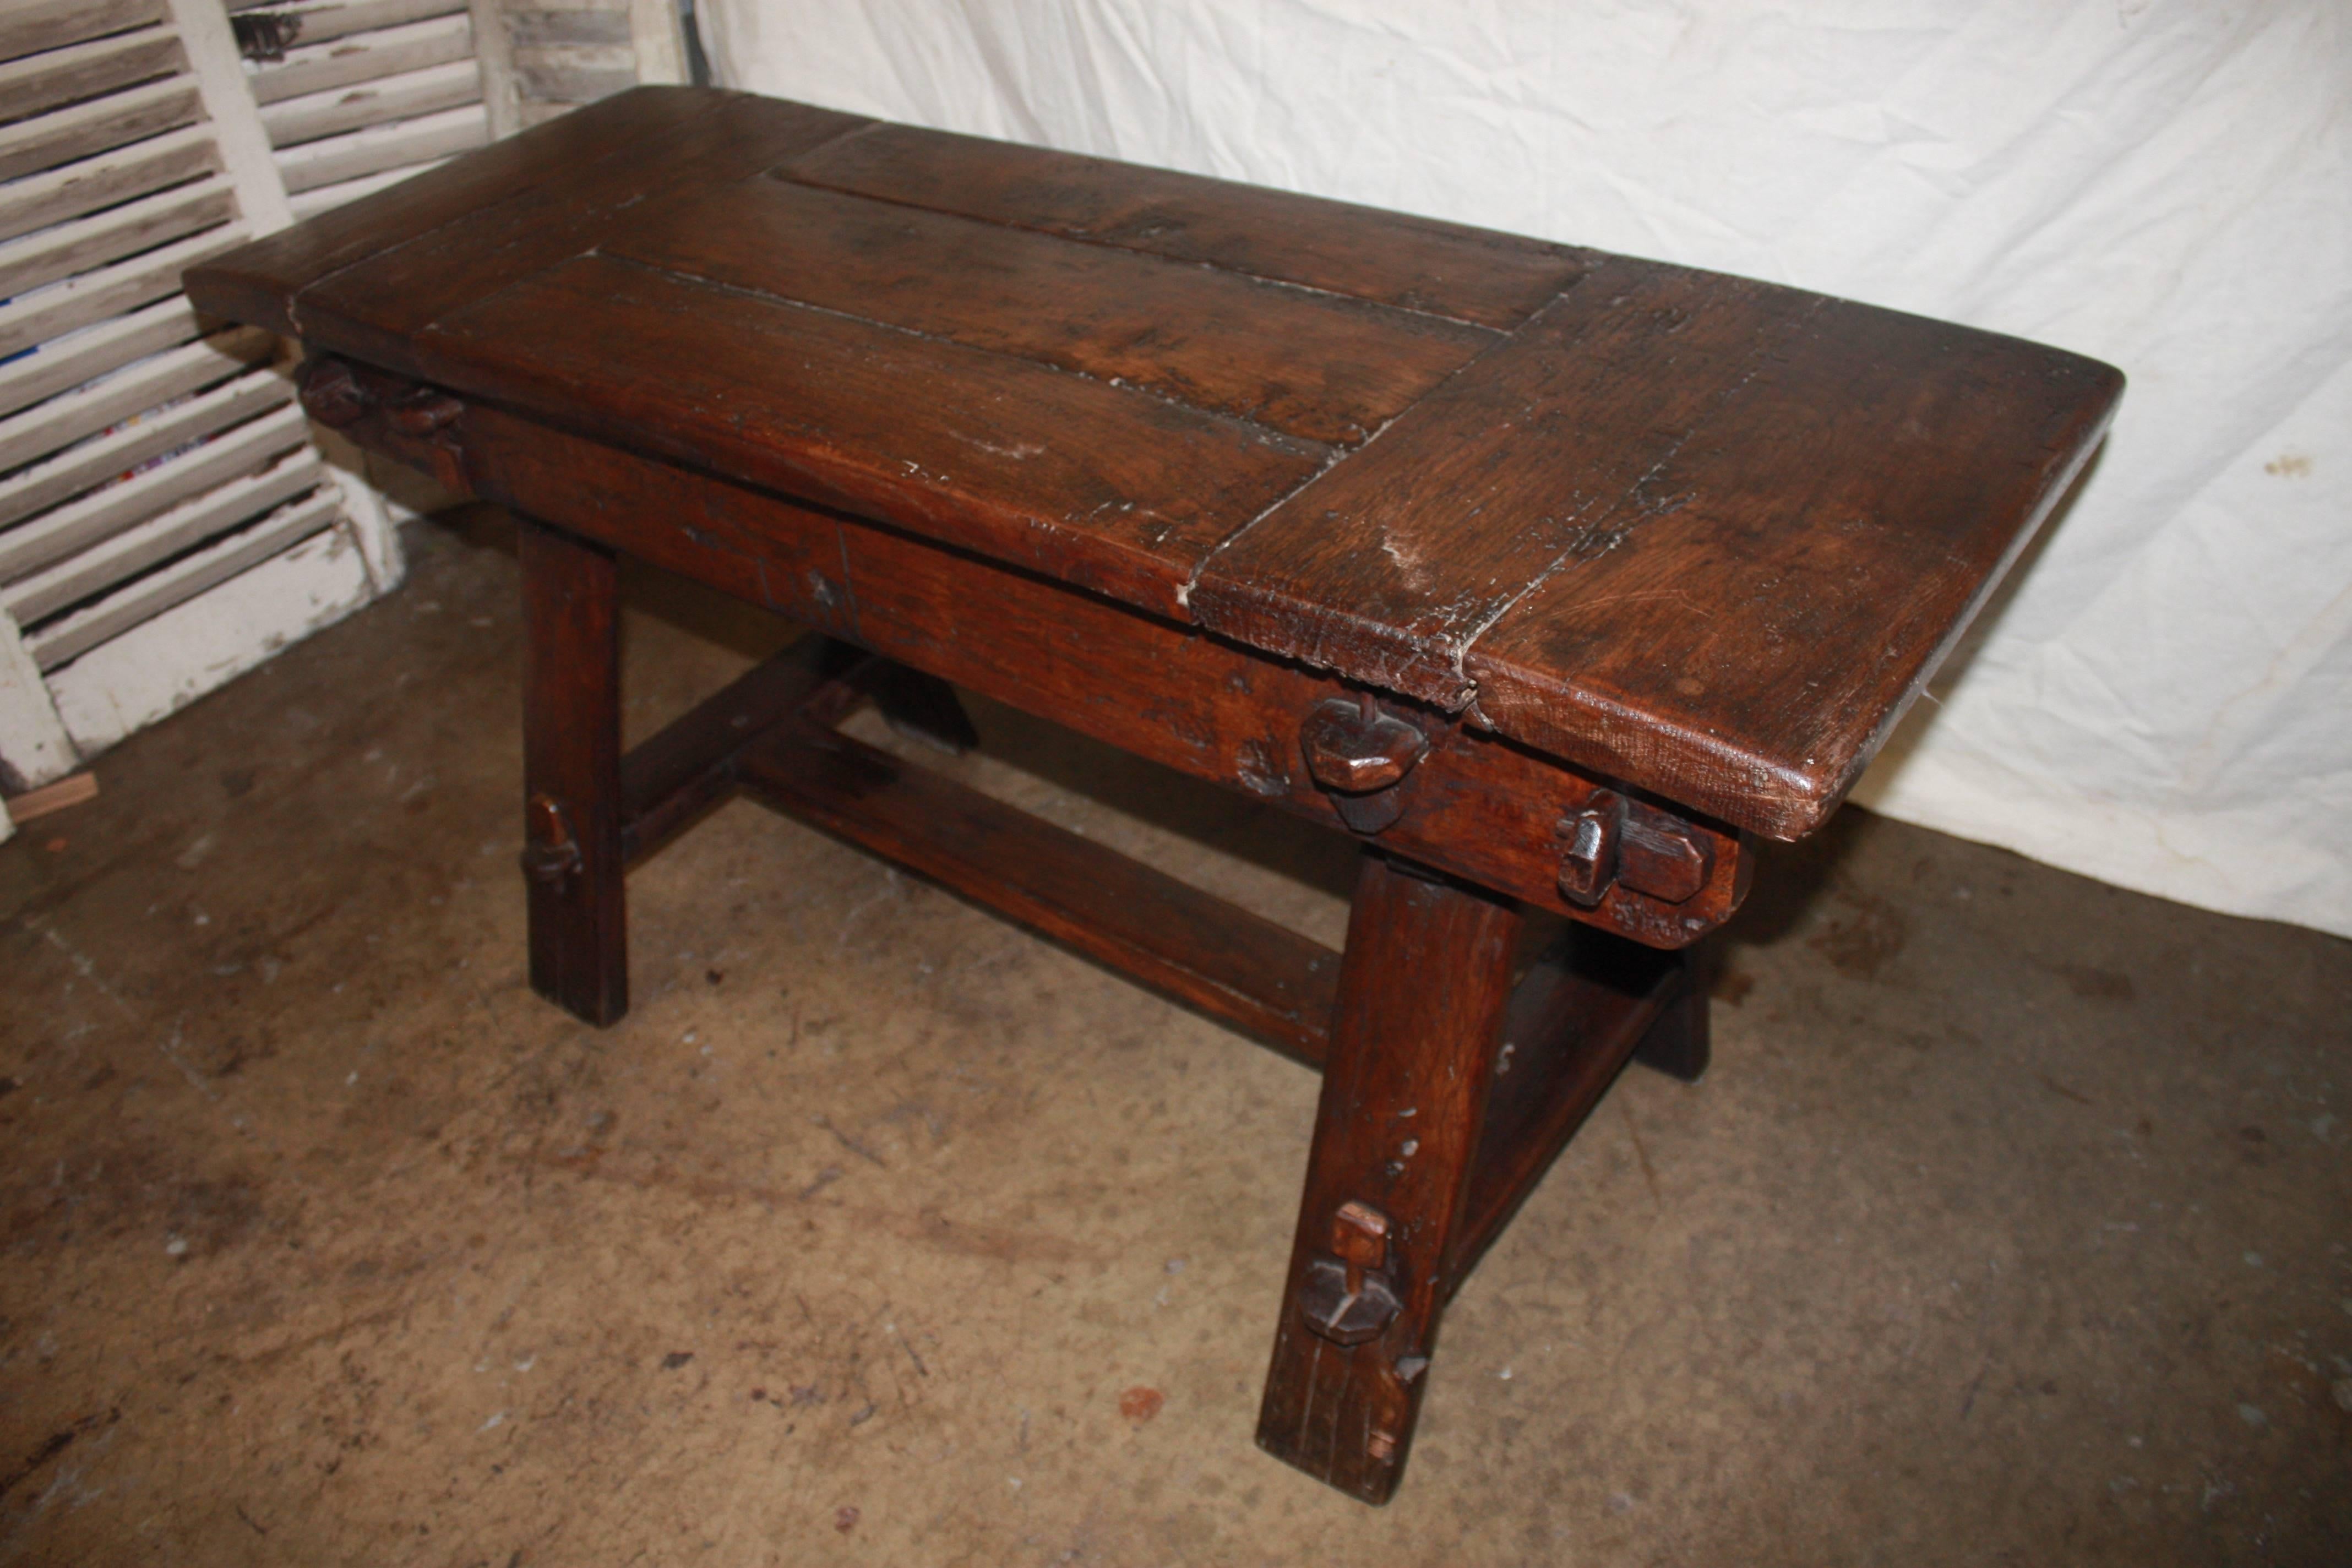 Late 17th century rustic table.